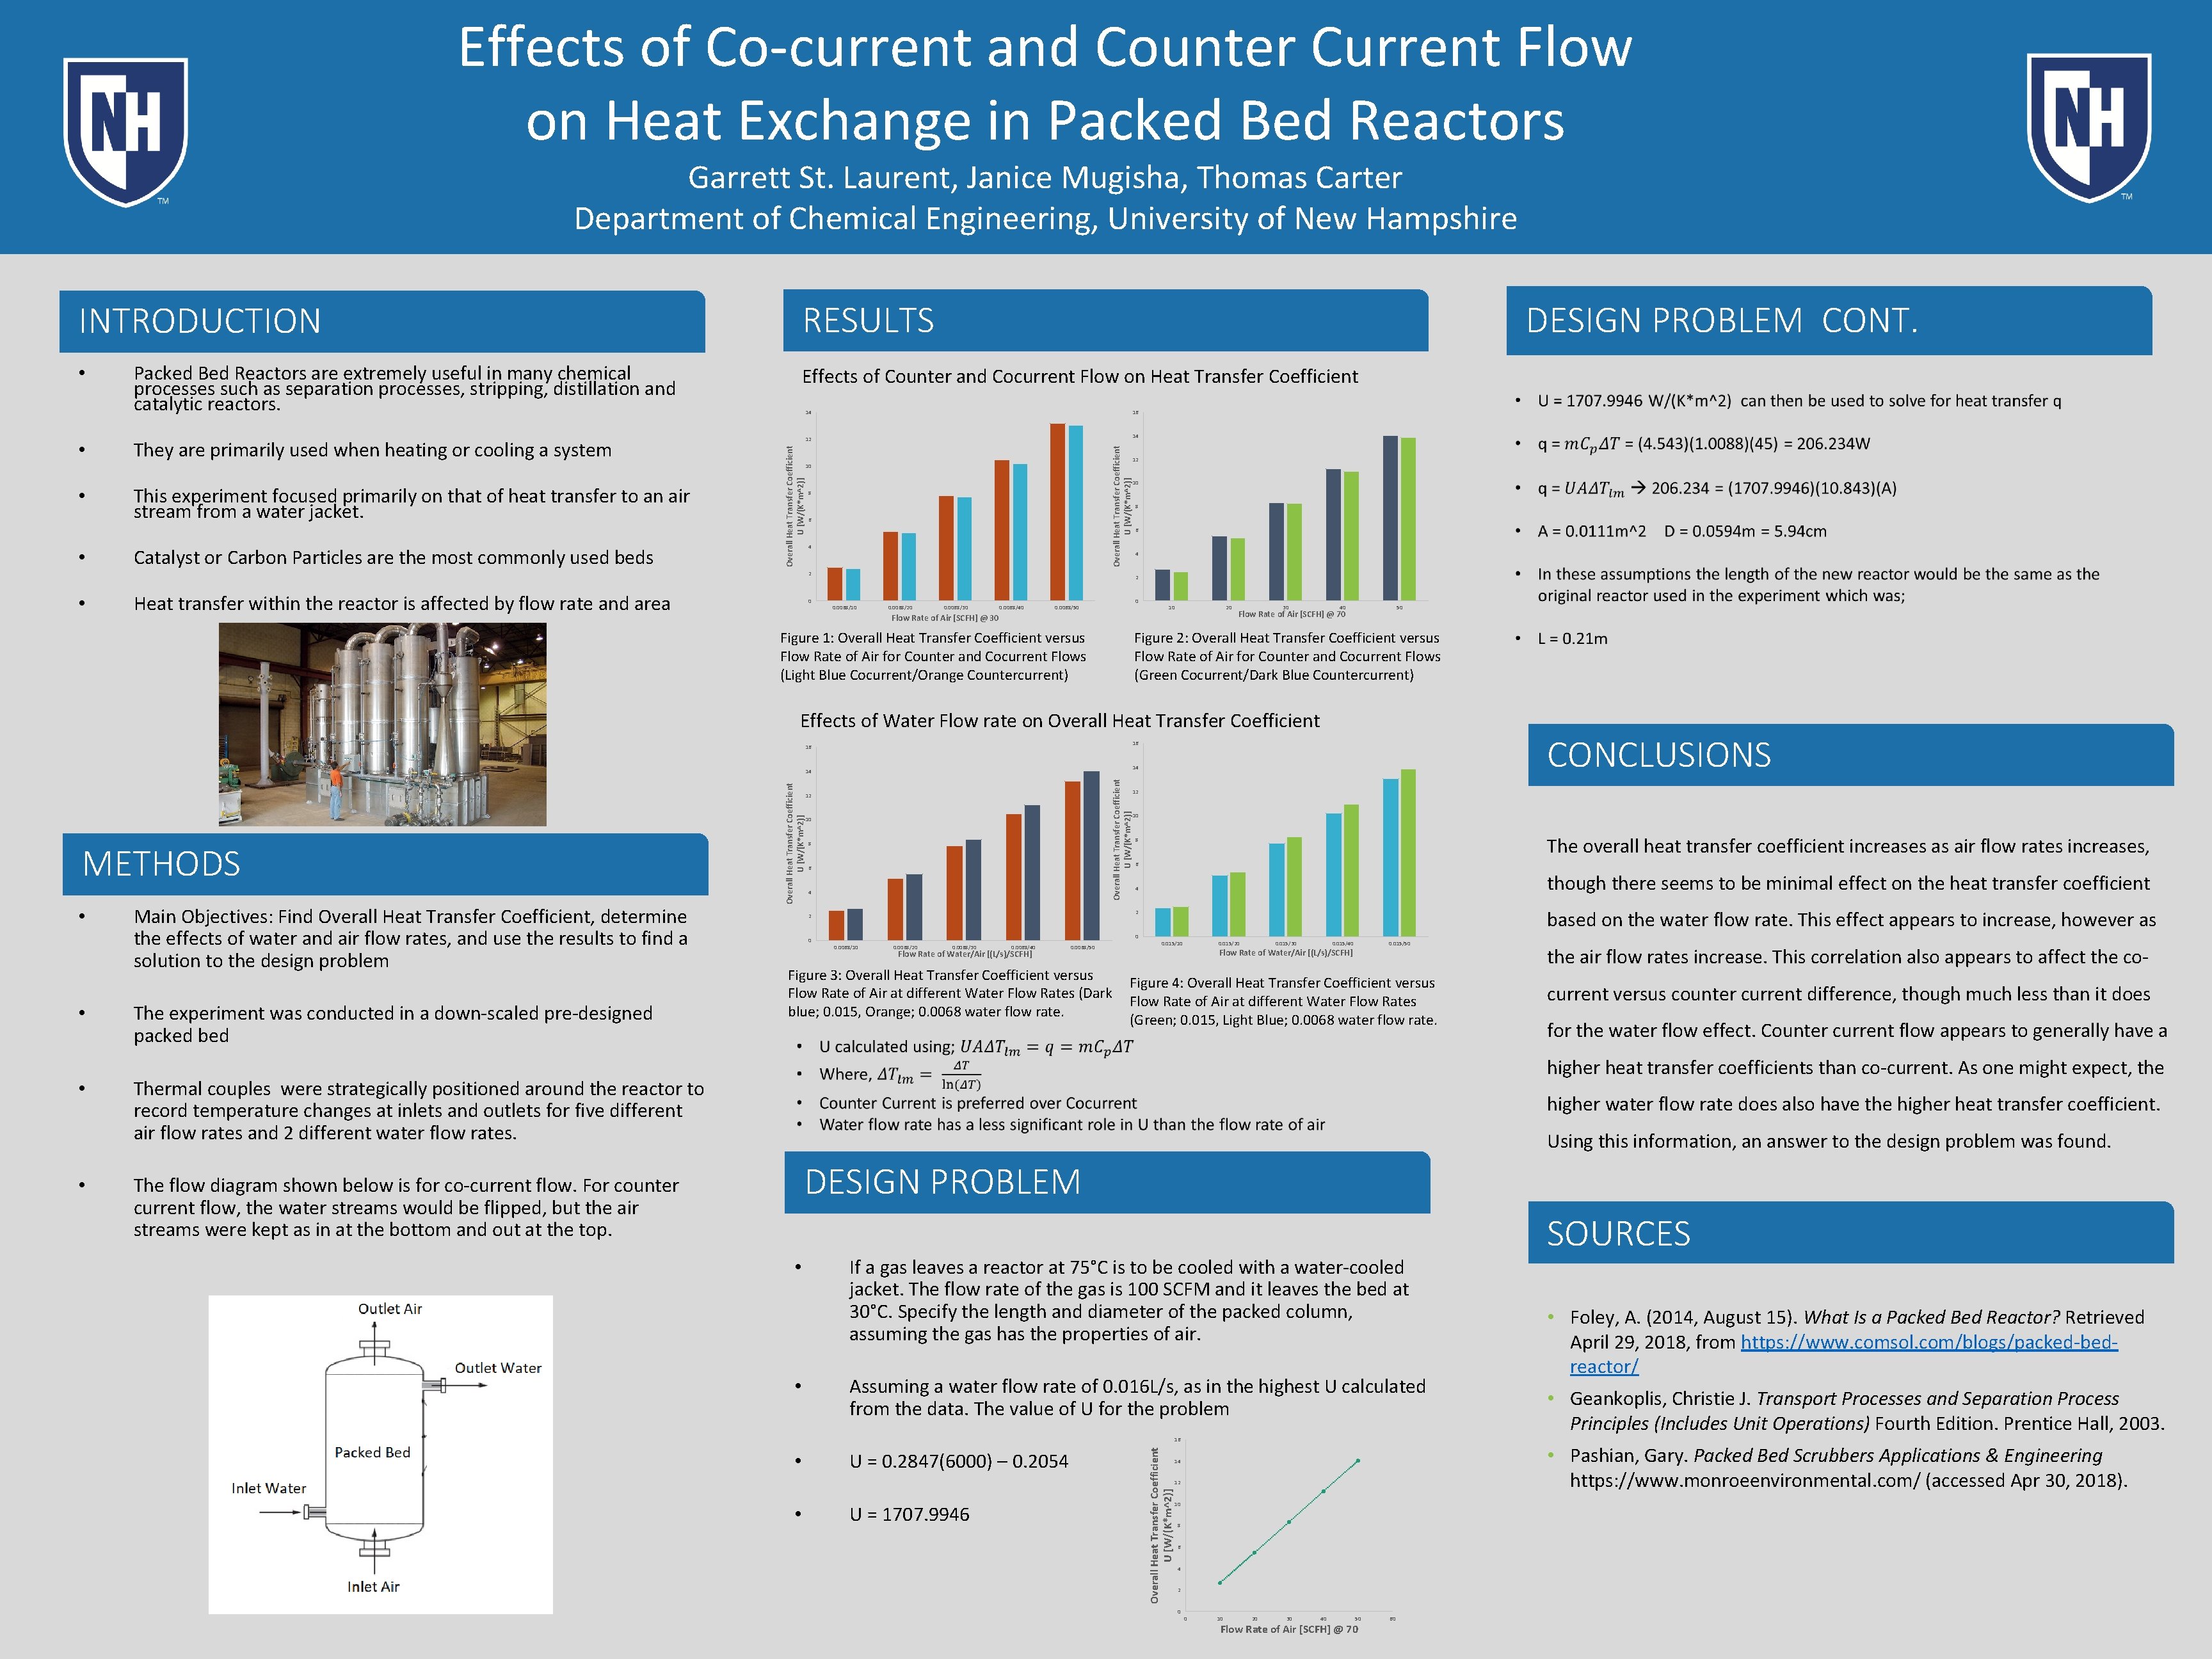 Effects of Co-current and Counter Current Flow on Heat Exchange in Packed Bed Reactors